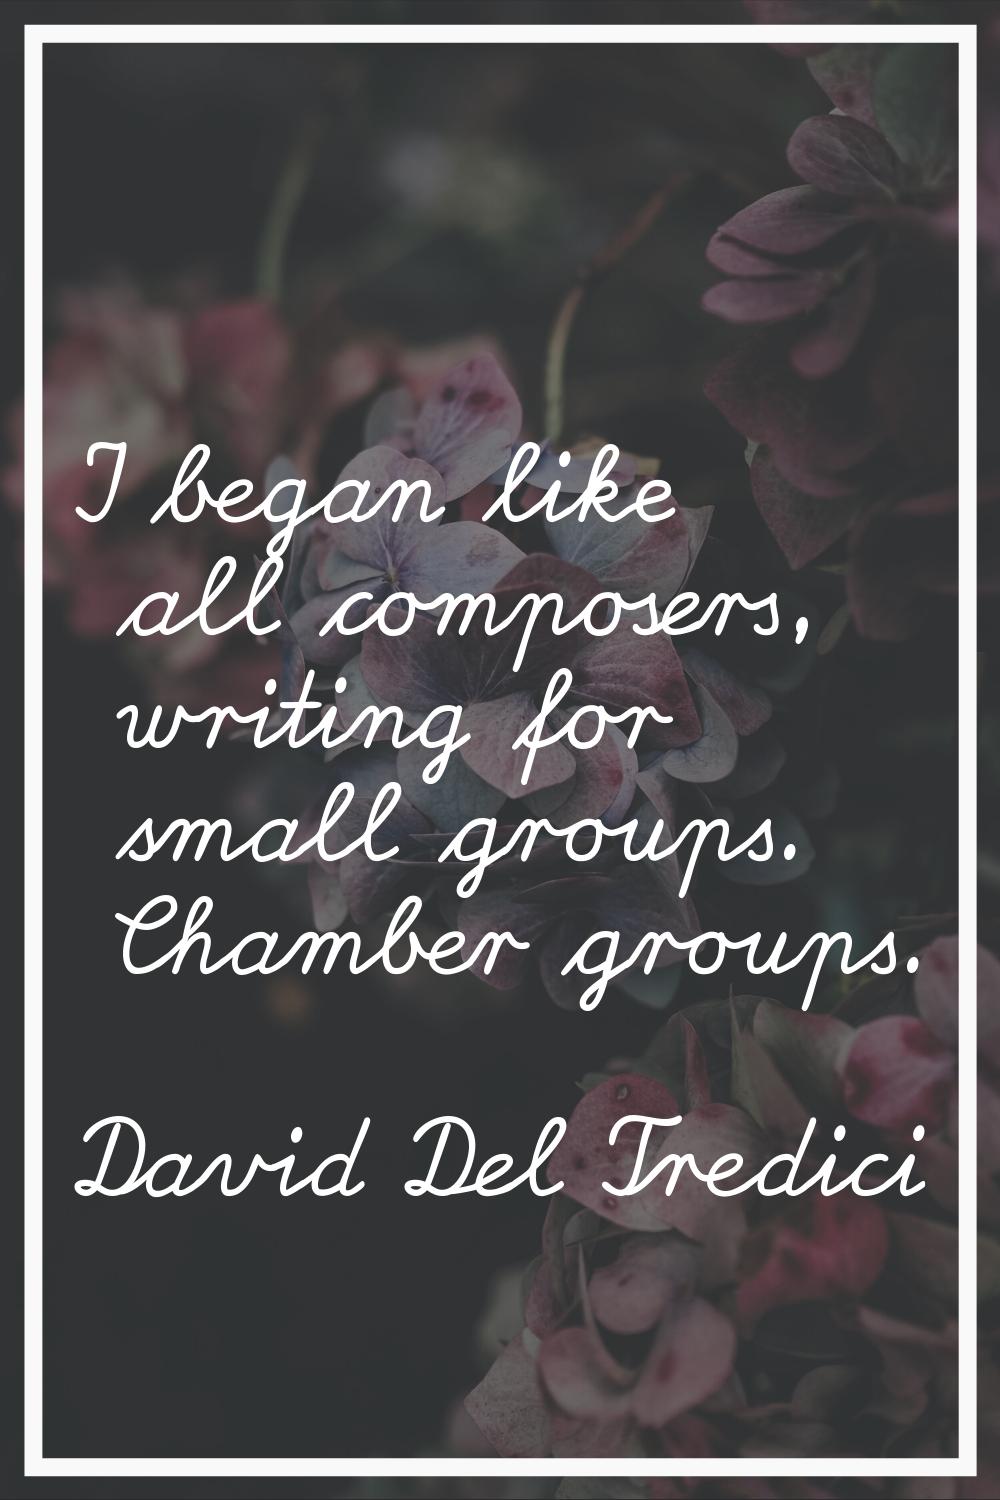 I began like all composers, writing for small groups. Chamber groups.